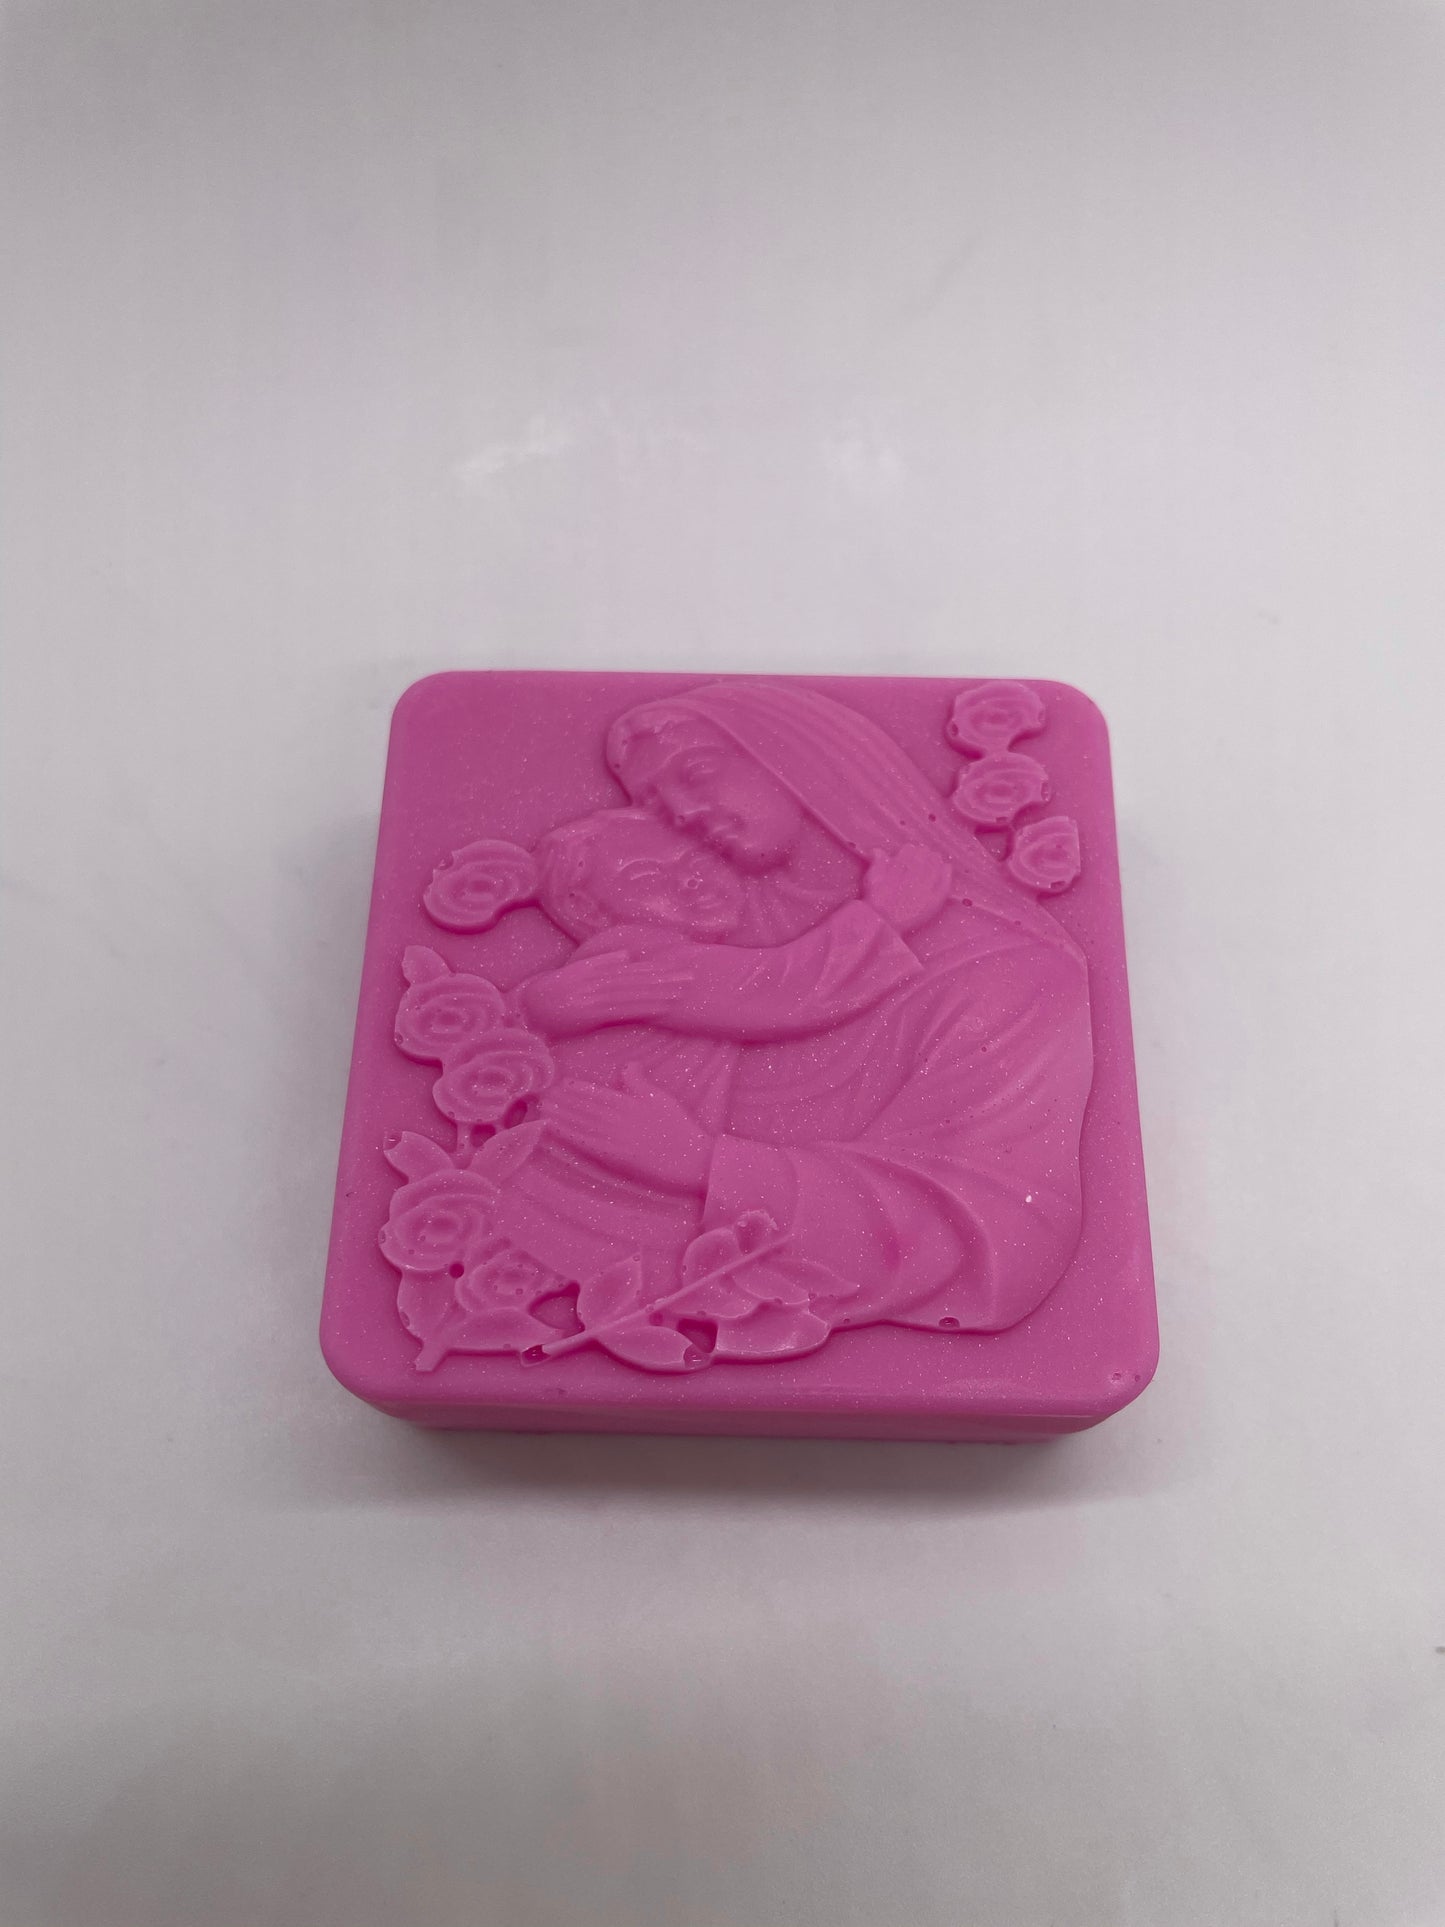 Mothers Love Soap Bar VARIES IN COLORS